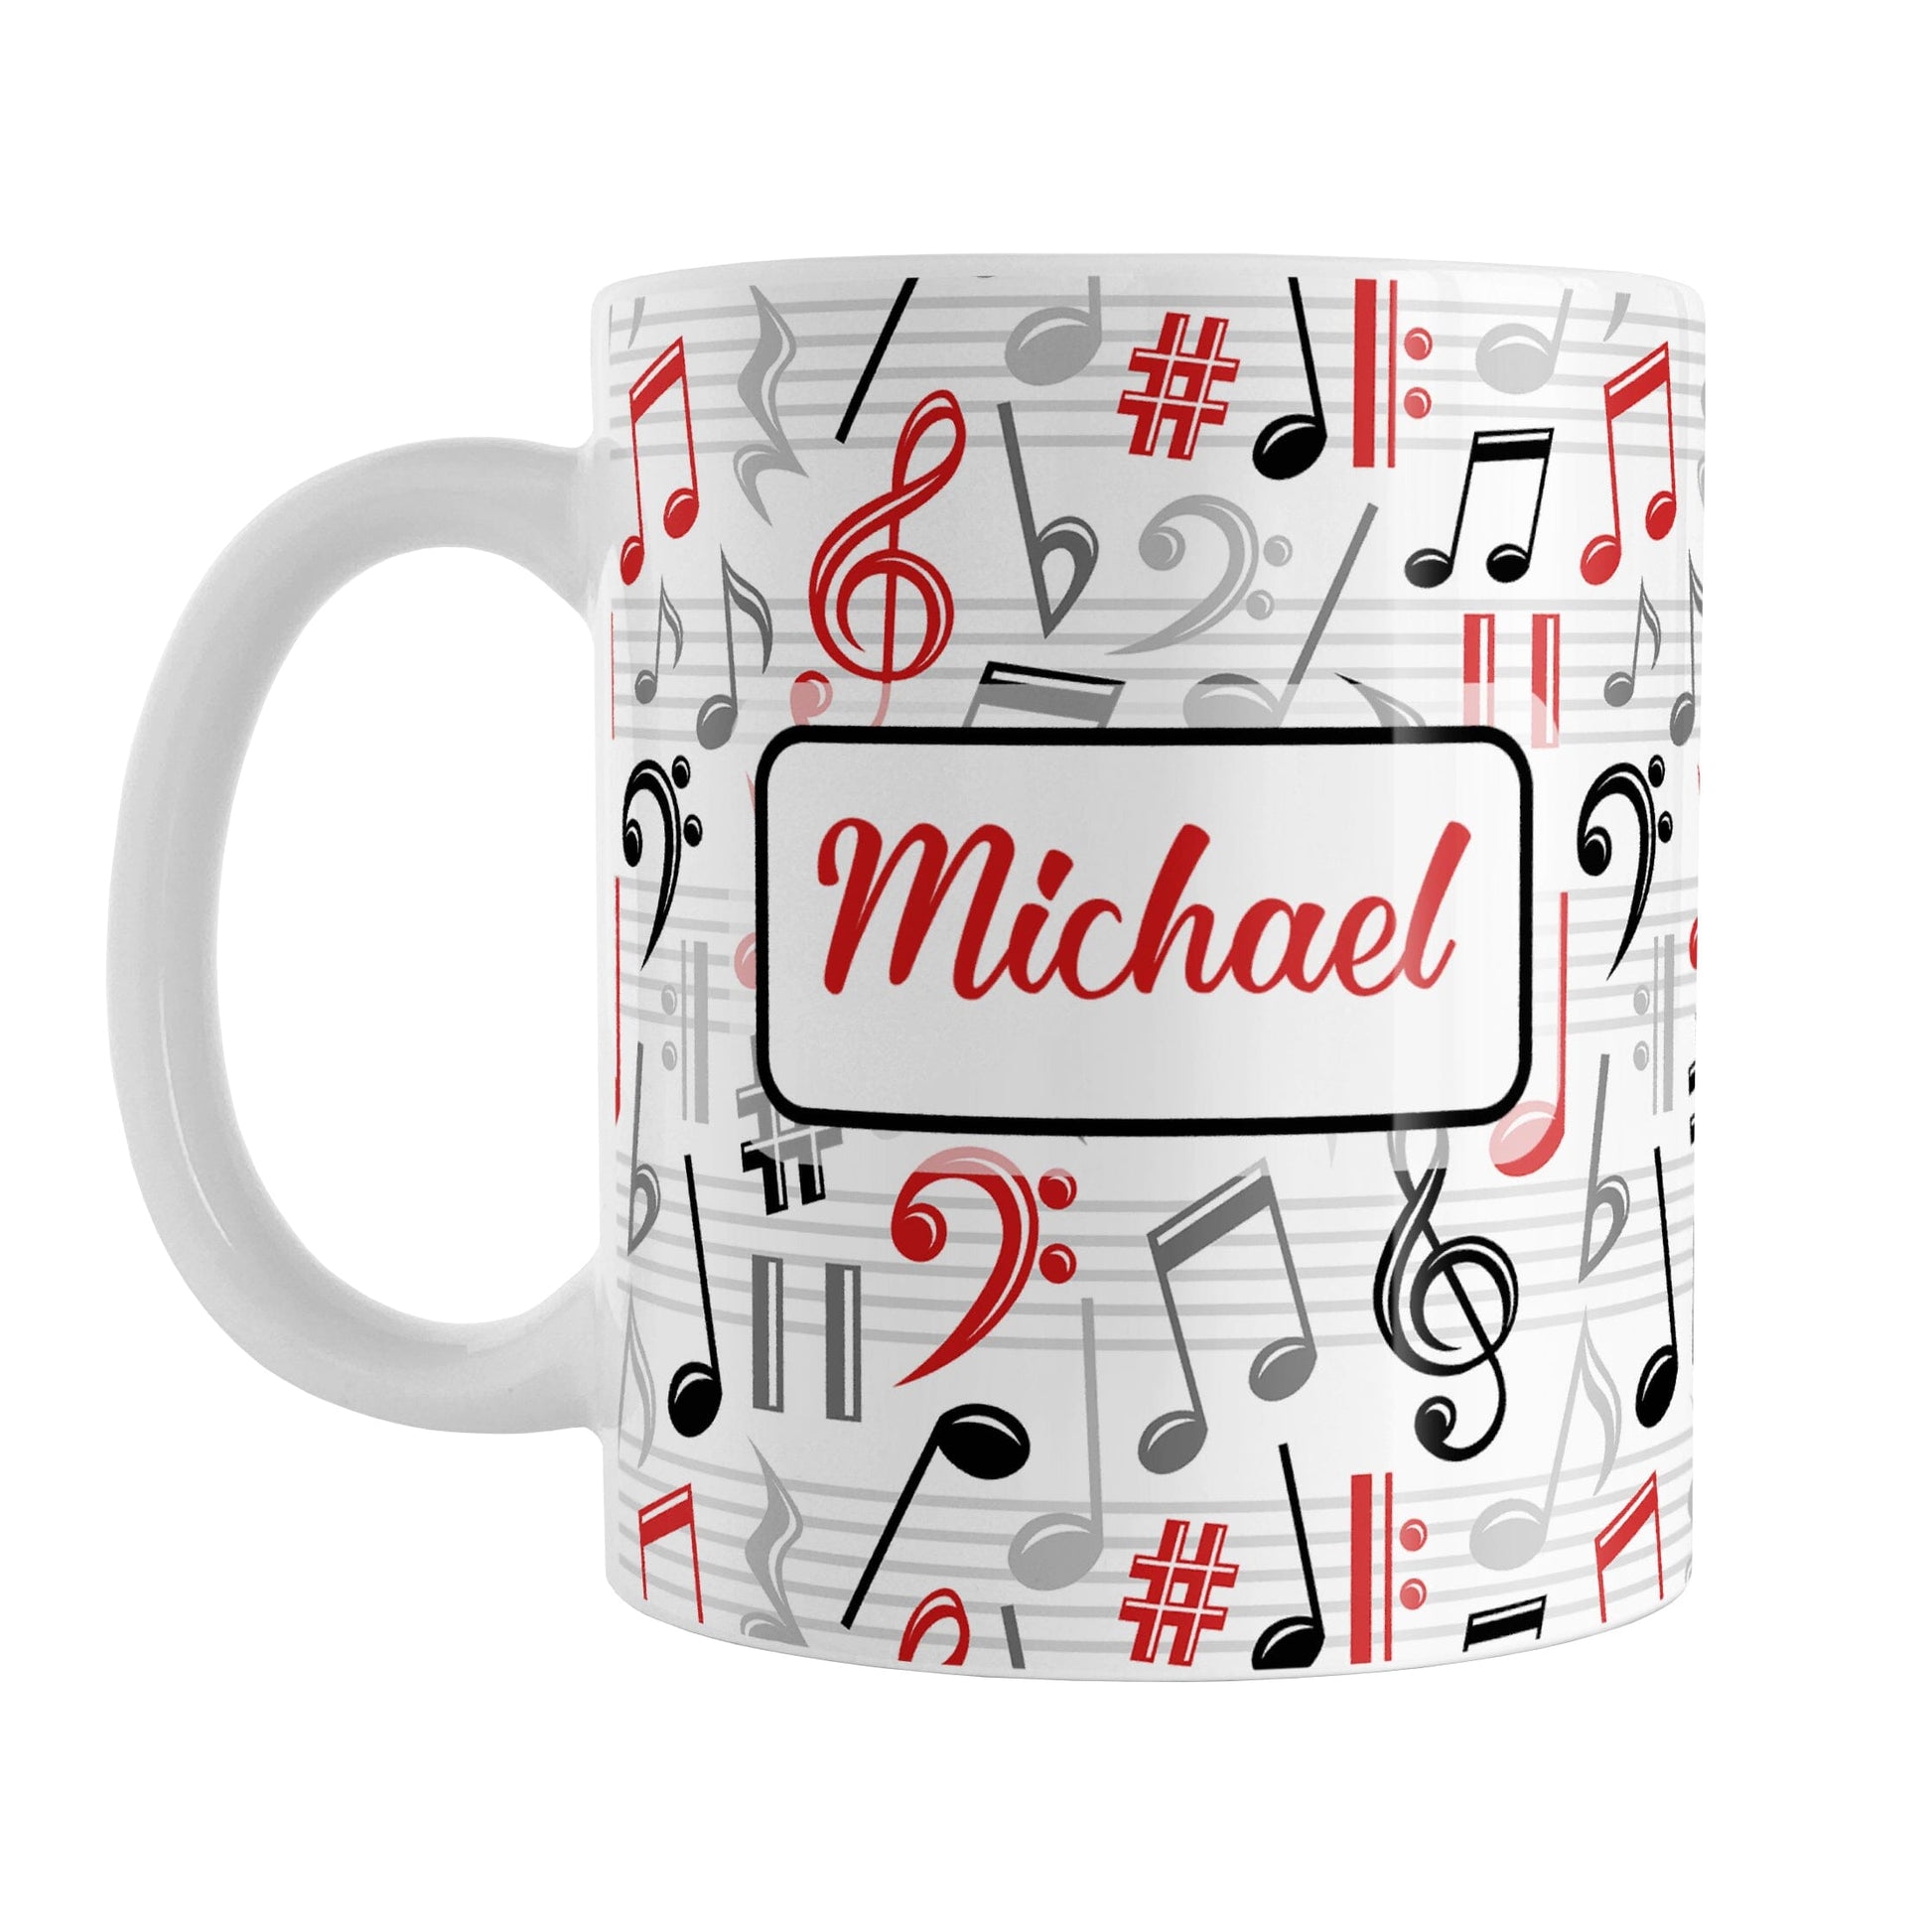 Personalized Red Music Notes Pattern Mug (11oz) at Amy's Coffee Mugs. A ceramic coffee mug designed with music notes and symbols in red, black, and gray in a pattern that wraps around the mug to the handle. Your personalized name is custom printed in a red script font on white over the music pattern design on both sides of the mug. 